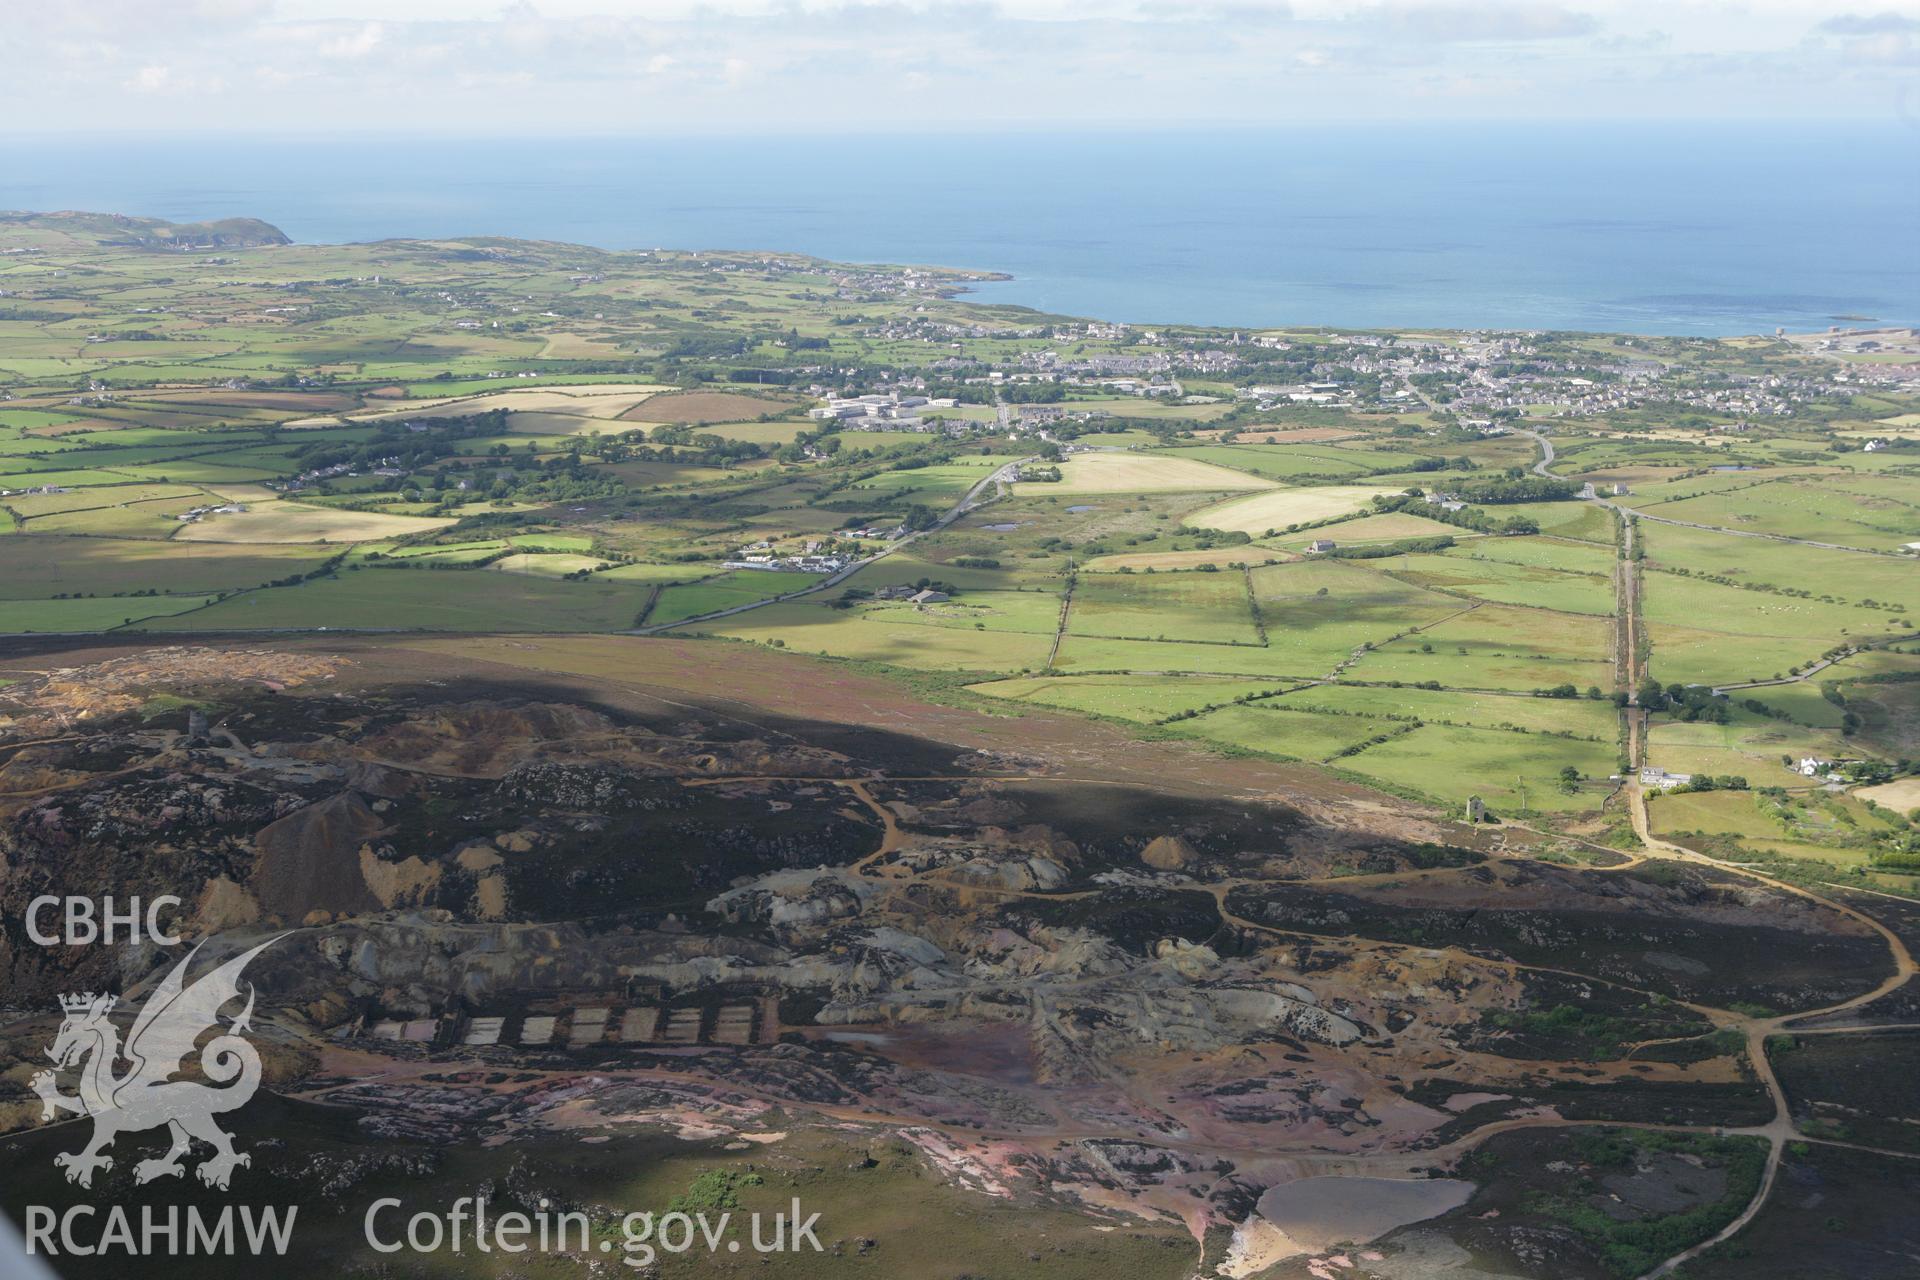 RCAHMW colour oblique photograph of Parys Mountain Copper Mines, Amlwch, view from south. Taken by Toby Driver on 20/07/2011.